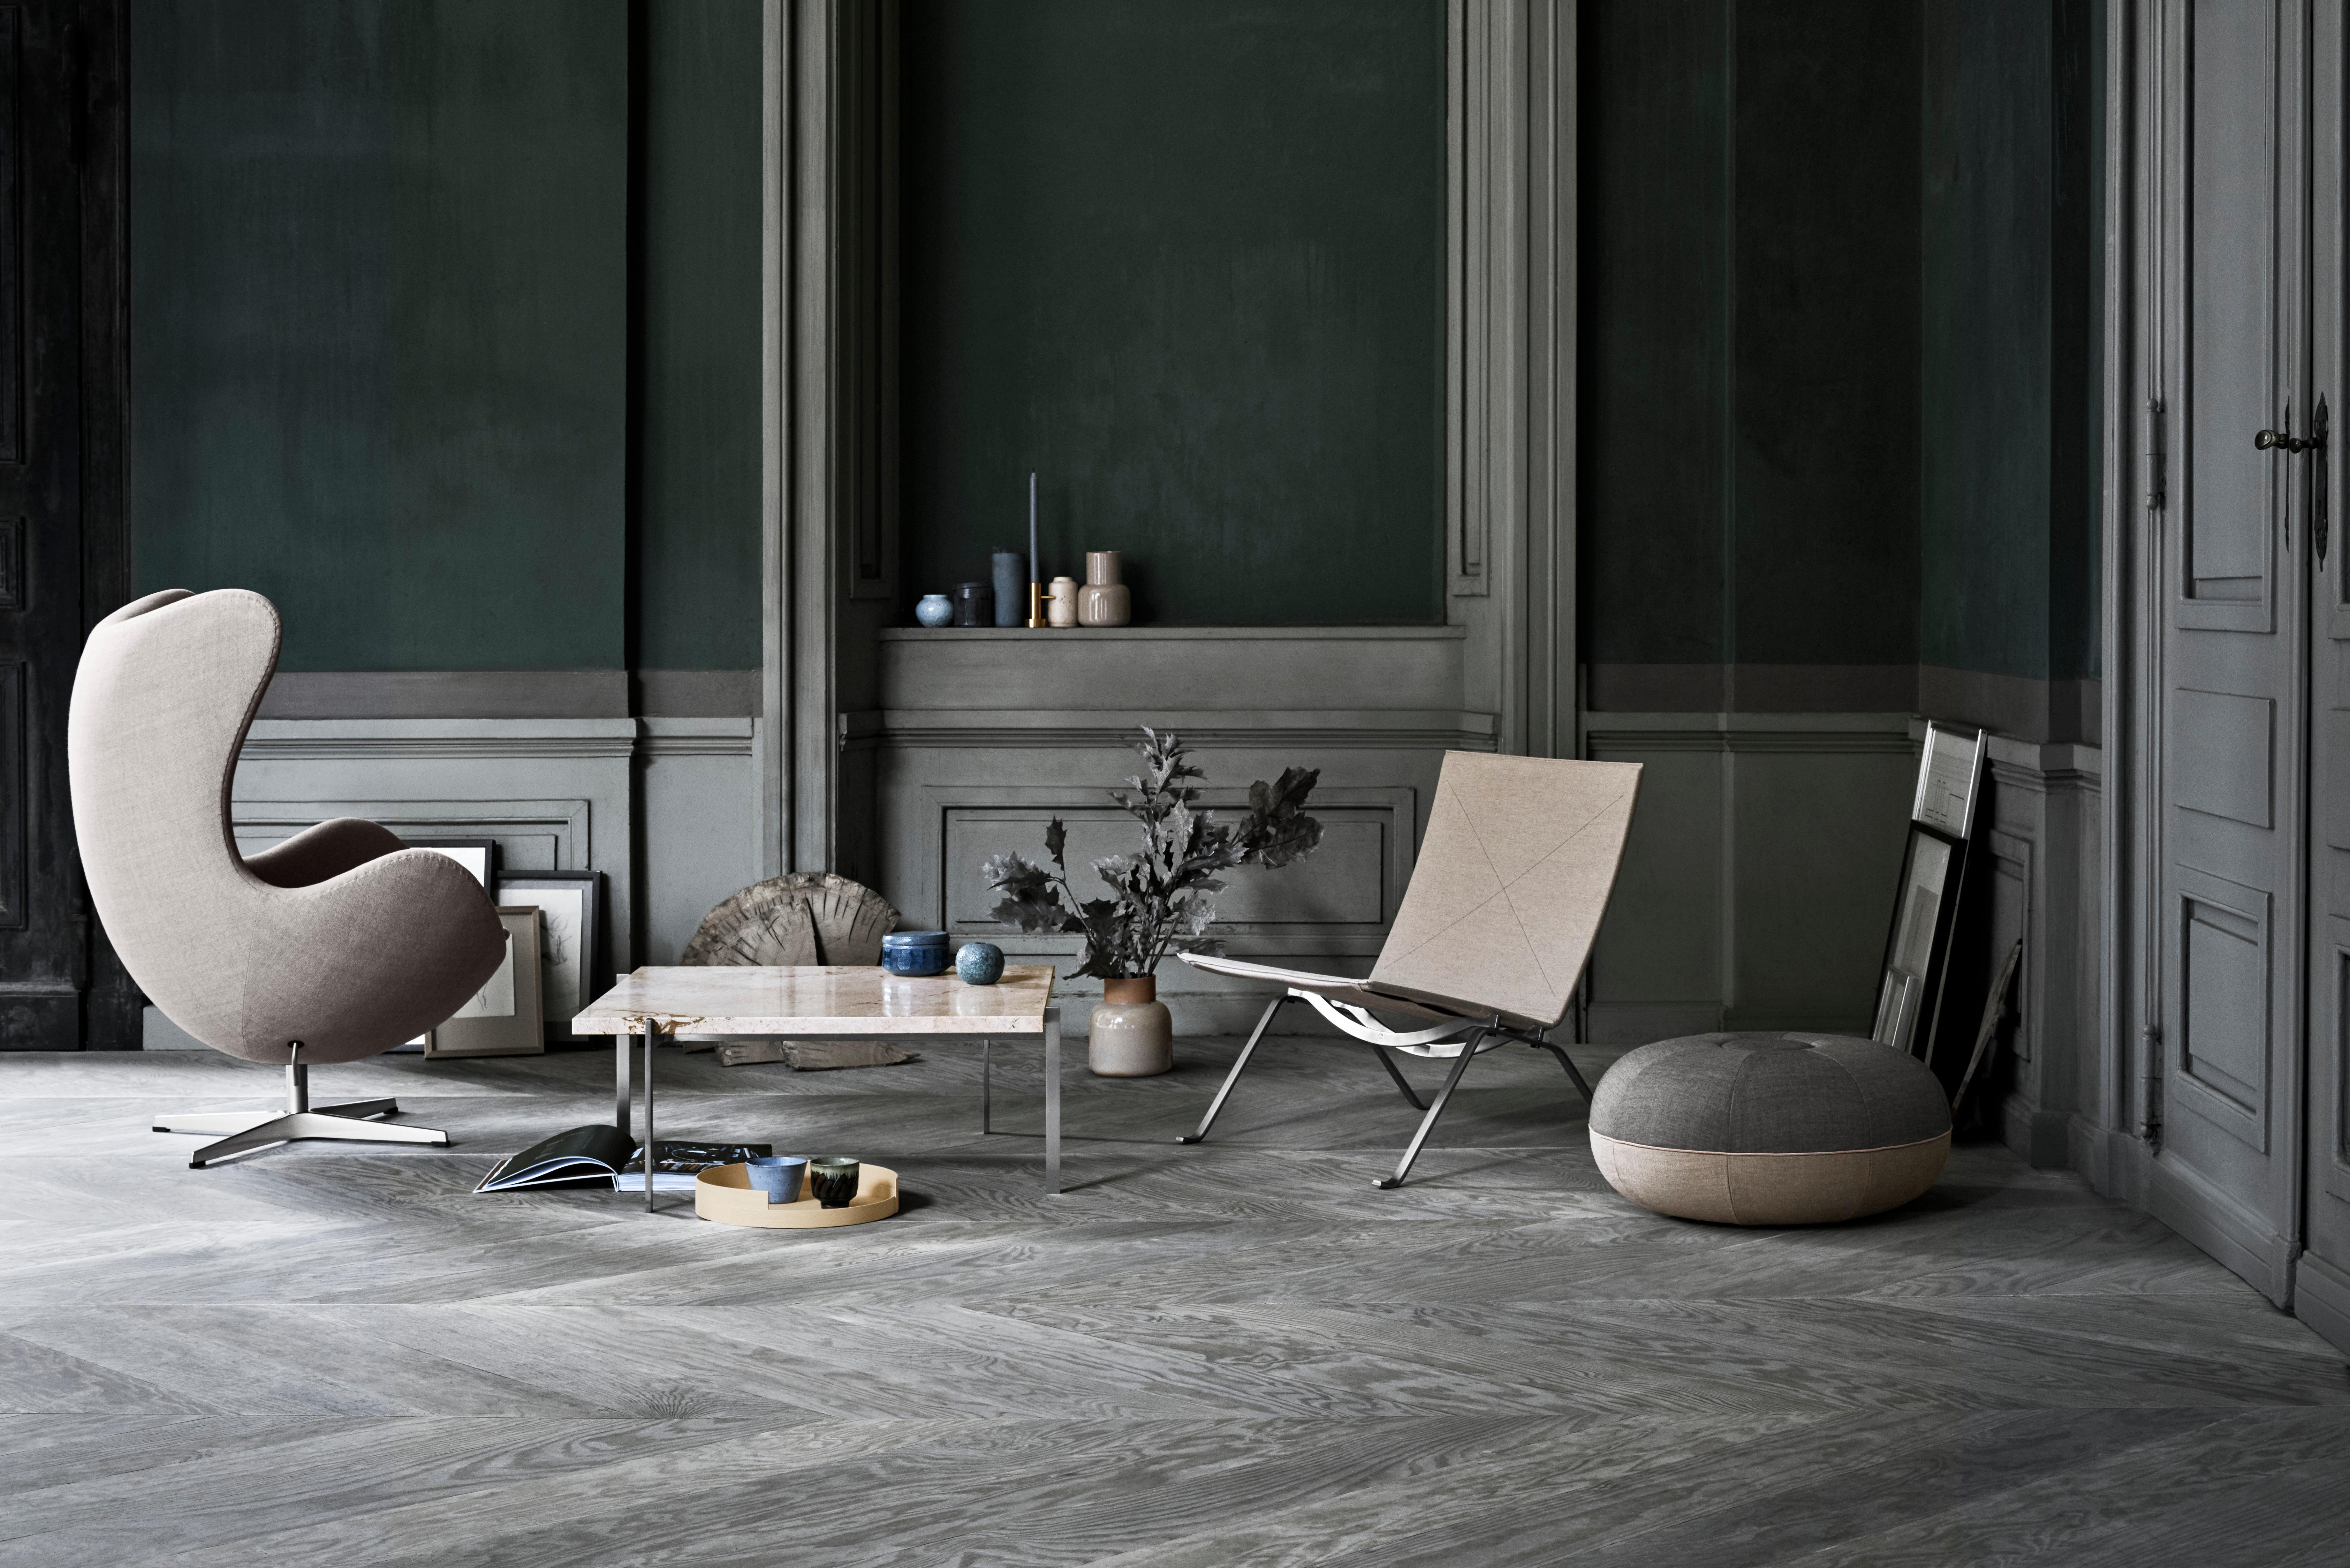 Arne Jacobsen 'Egg' Chair for Fritz Hansen in Fabric Upholstery (Cat. 1).

Established in 1872, Fritz Hansen has become synonymous with legendary Danish design. Combining timeless craftsmanship with an emphasis on sustainability, the brand’s